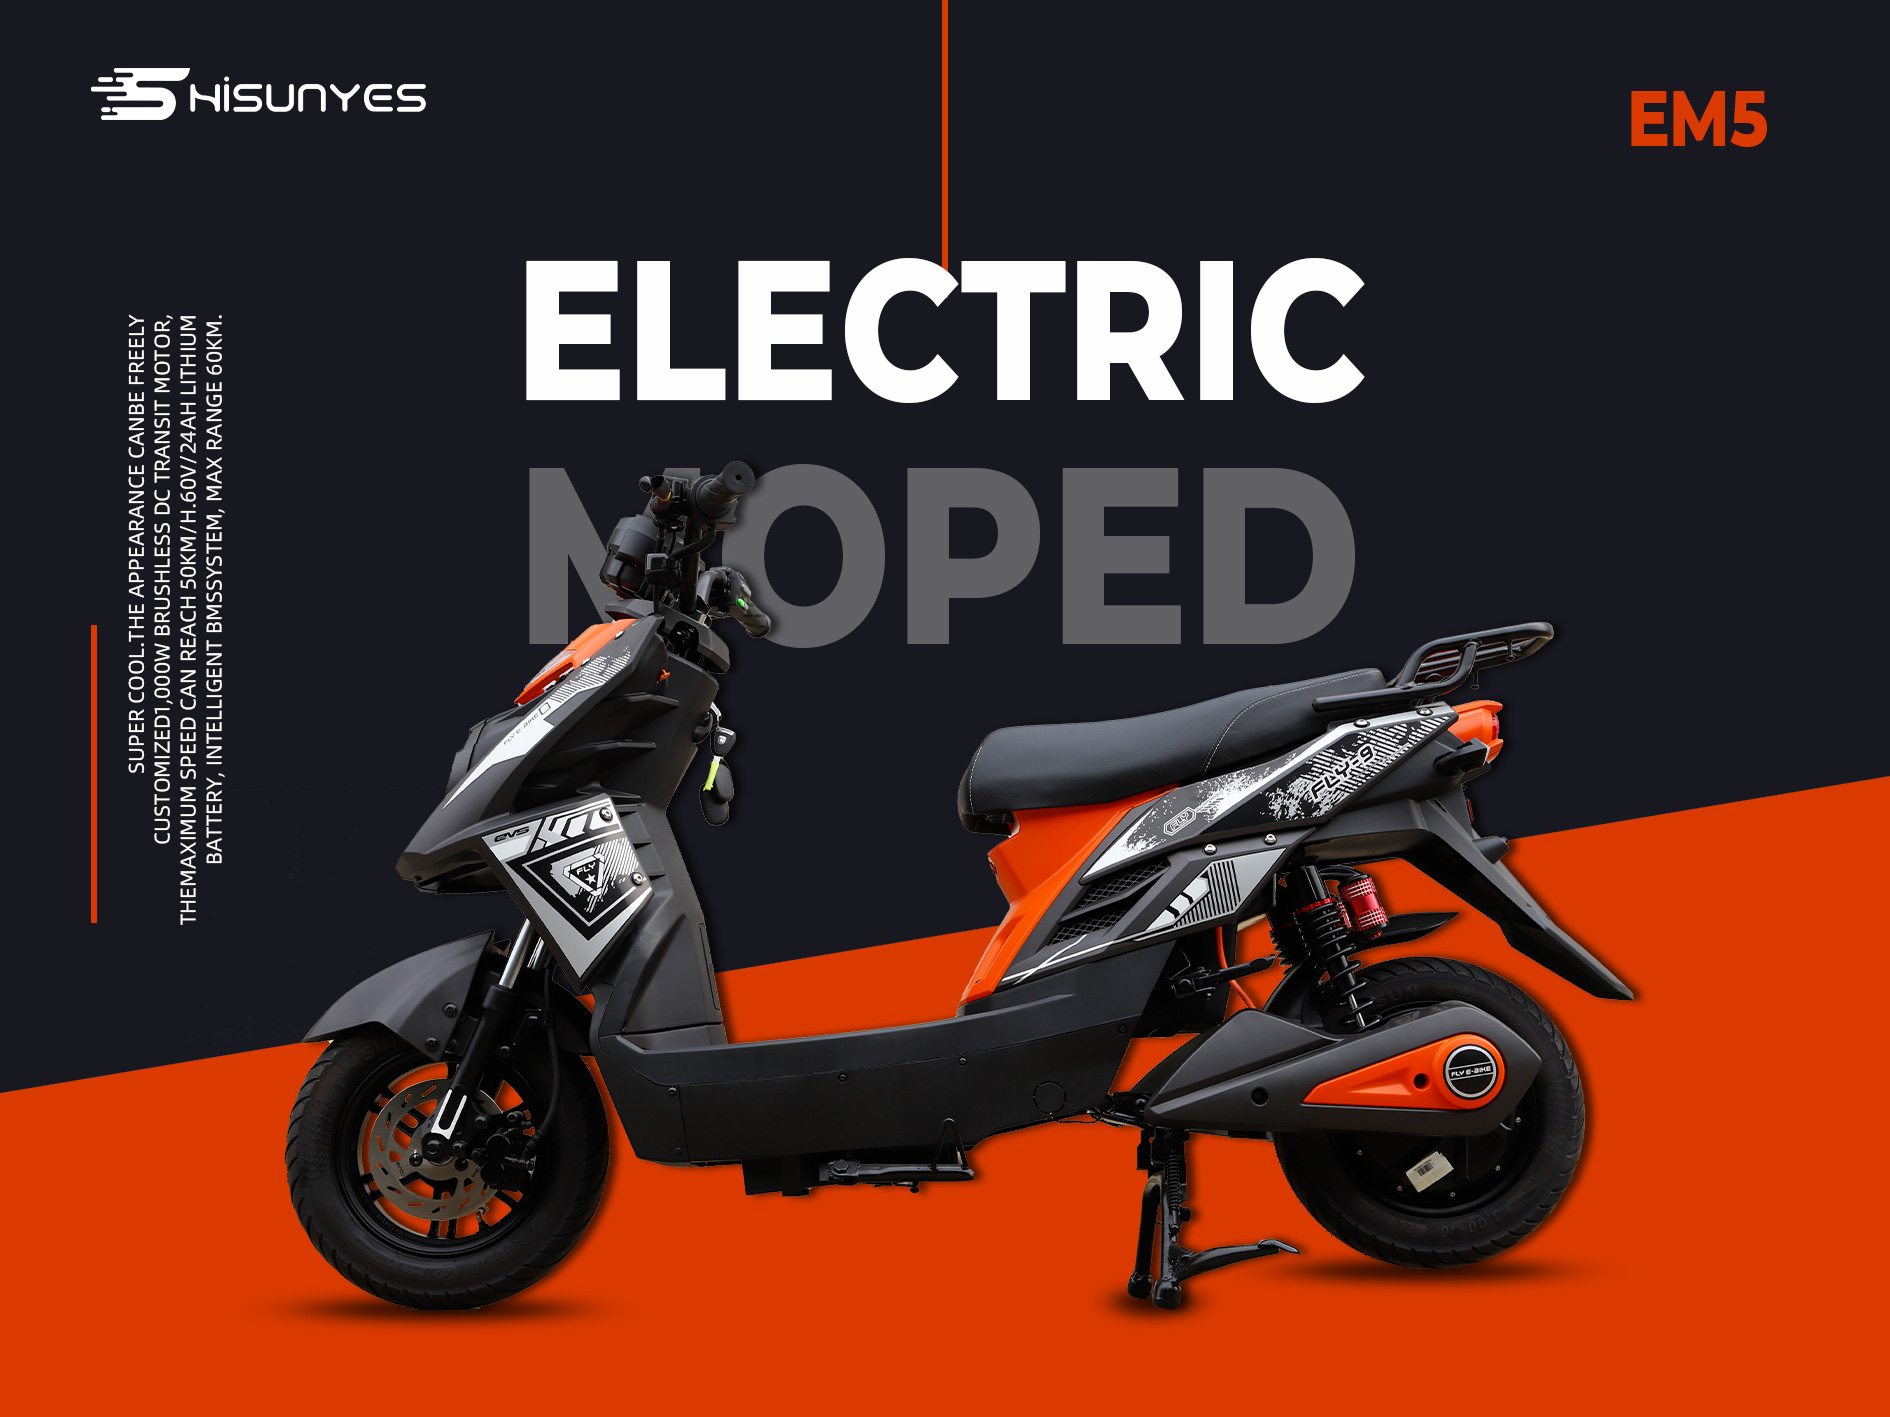 The electric scooter EM5 is on sale